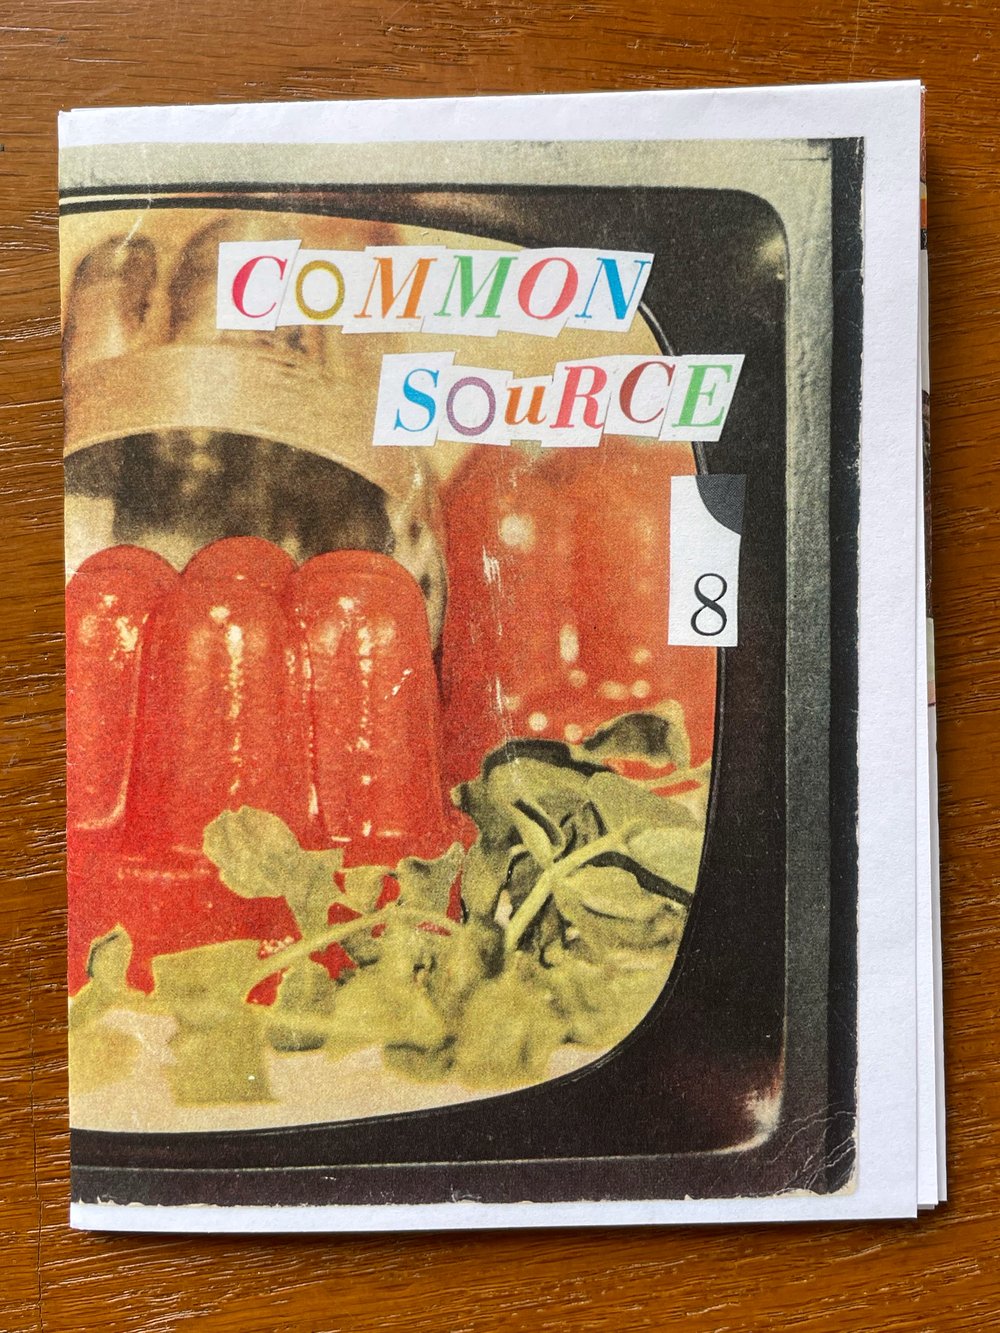 COMMON SOURCE #8 by Mary Lamb